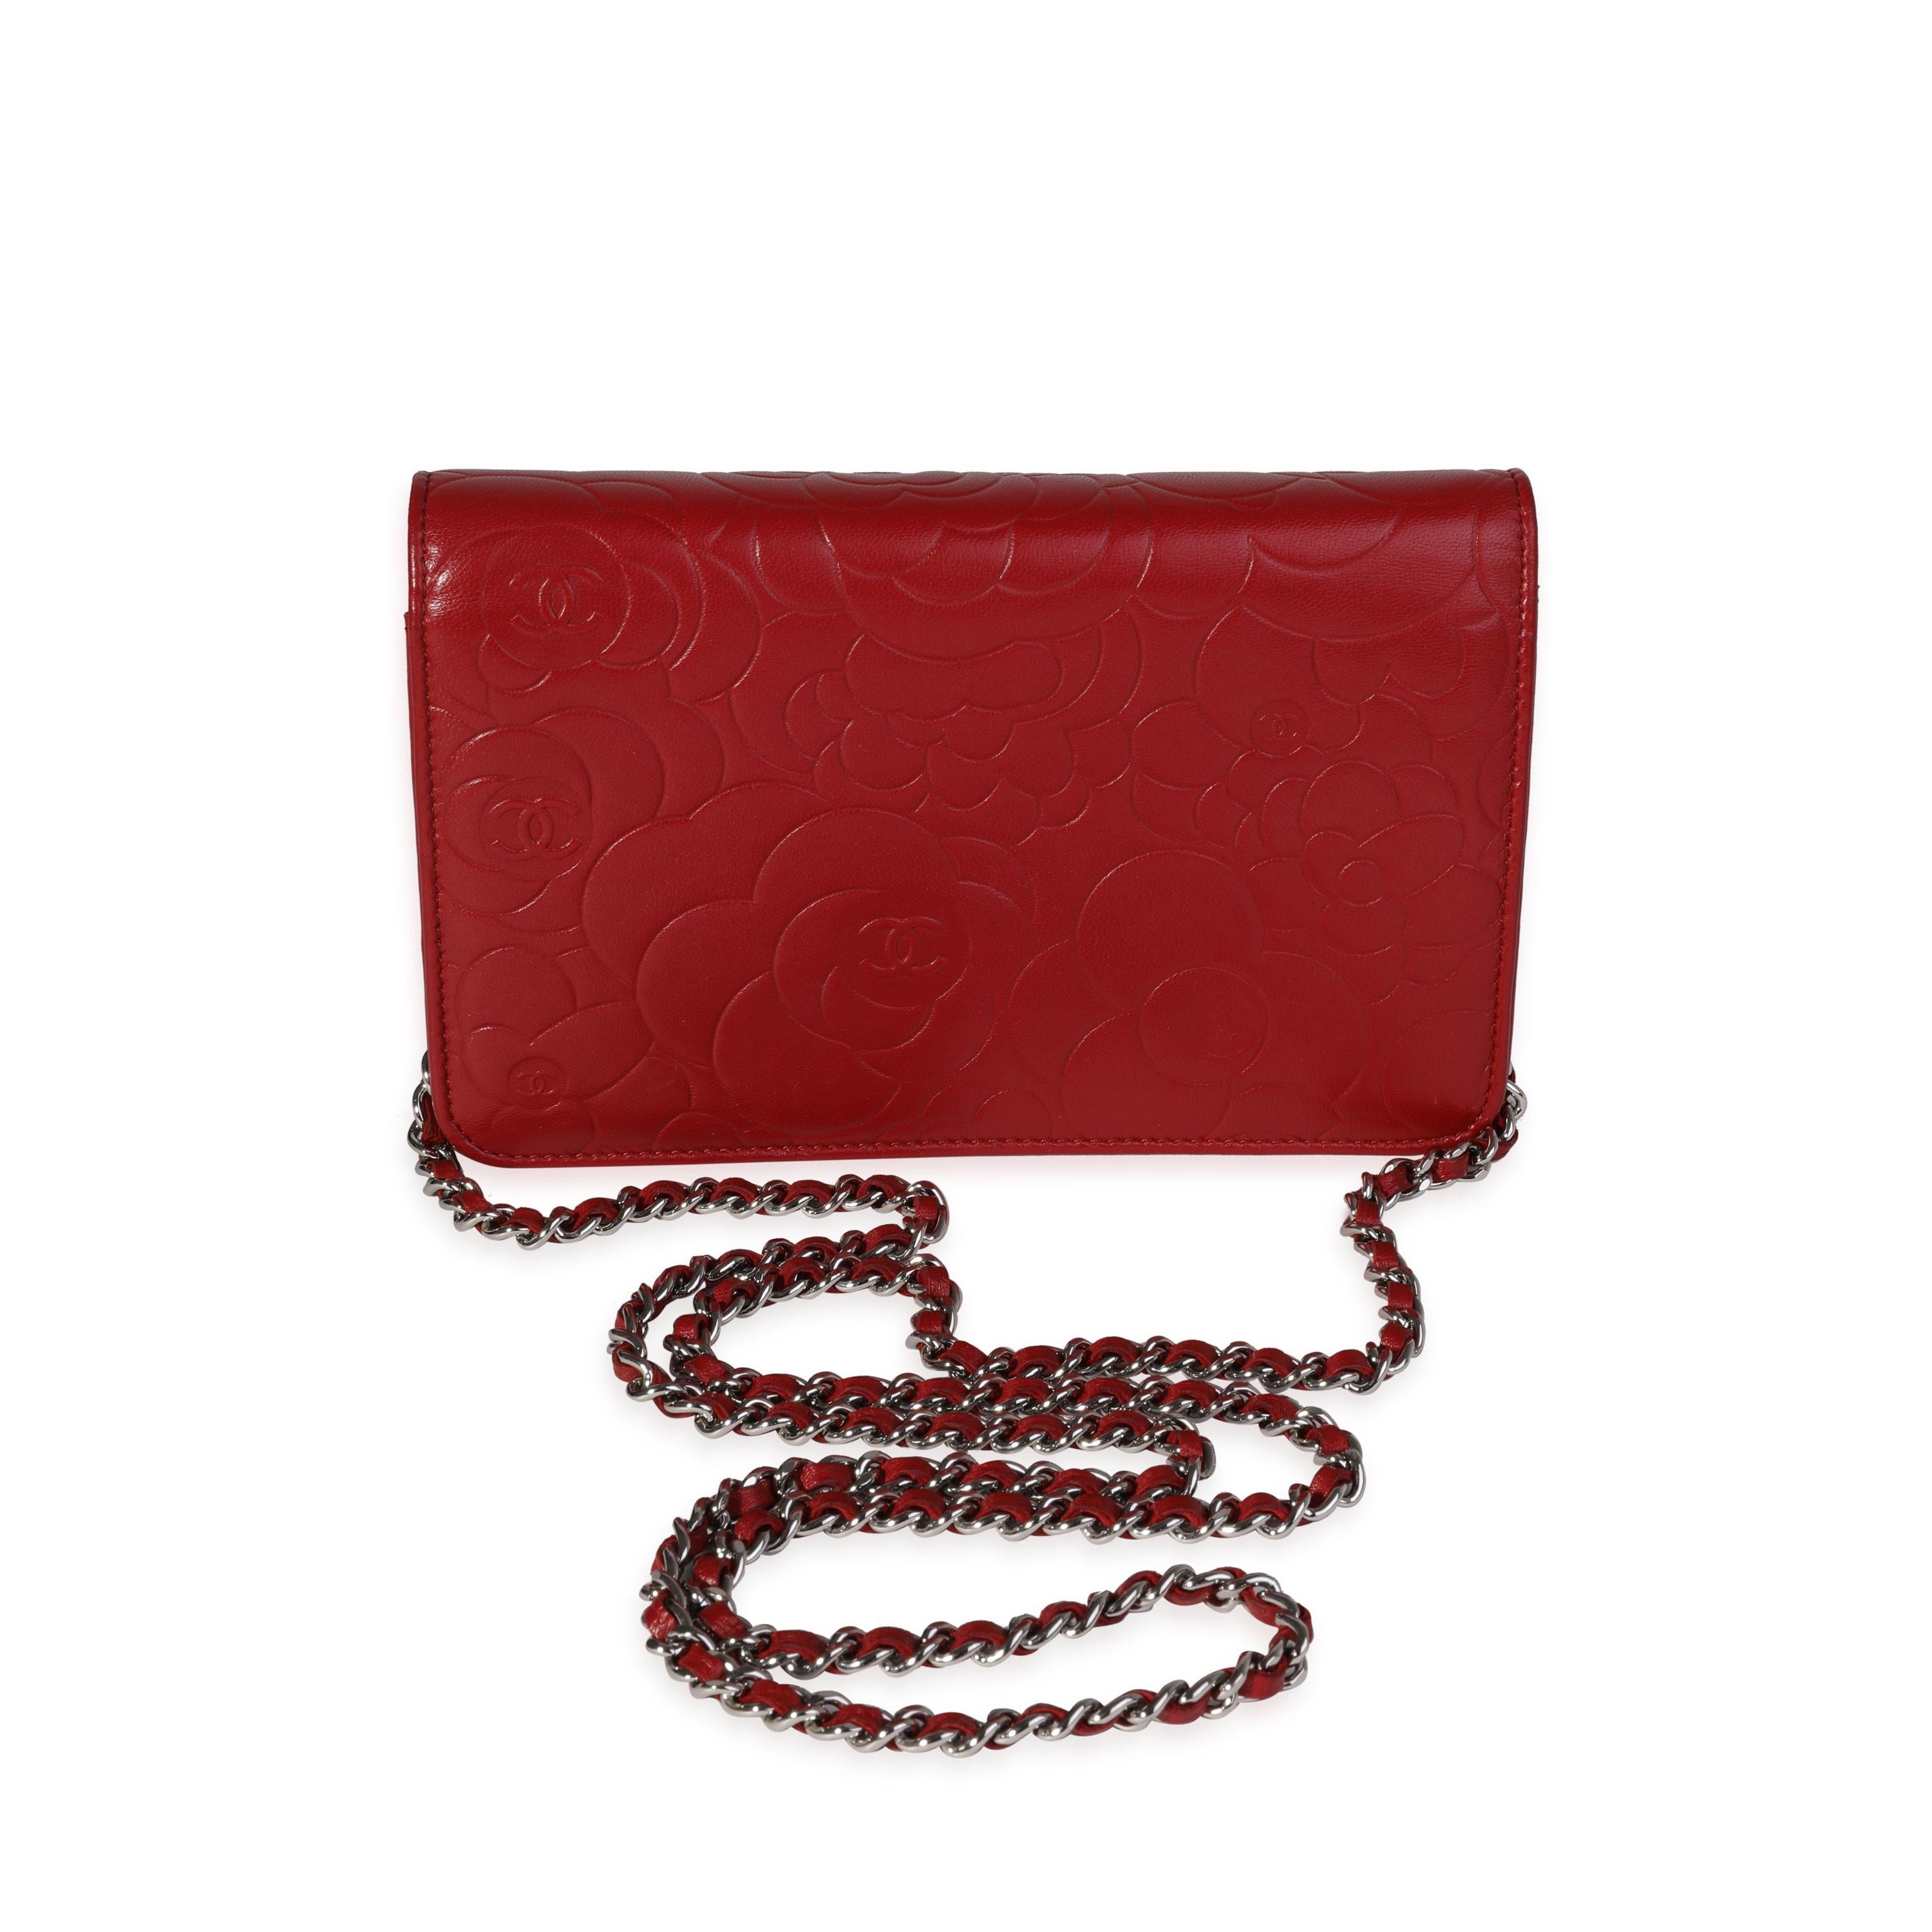 Listing Title: Chanel Red Camellia-Embossed Leather Wallet on Chain
SKU: 121360
Condition: Pre-owned (3000)
Handbag Condition: Very Good
Condition Comments: Very Good Condition. Light scuffing to corners. Light scratching to hardware. Light scuffing